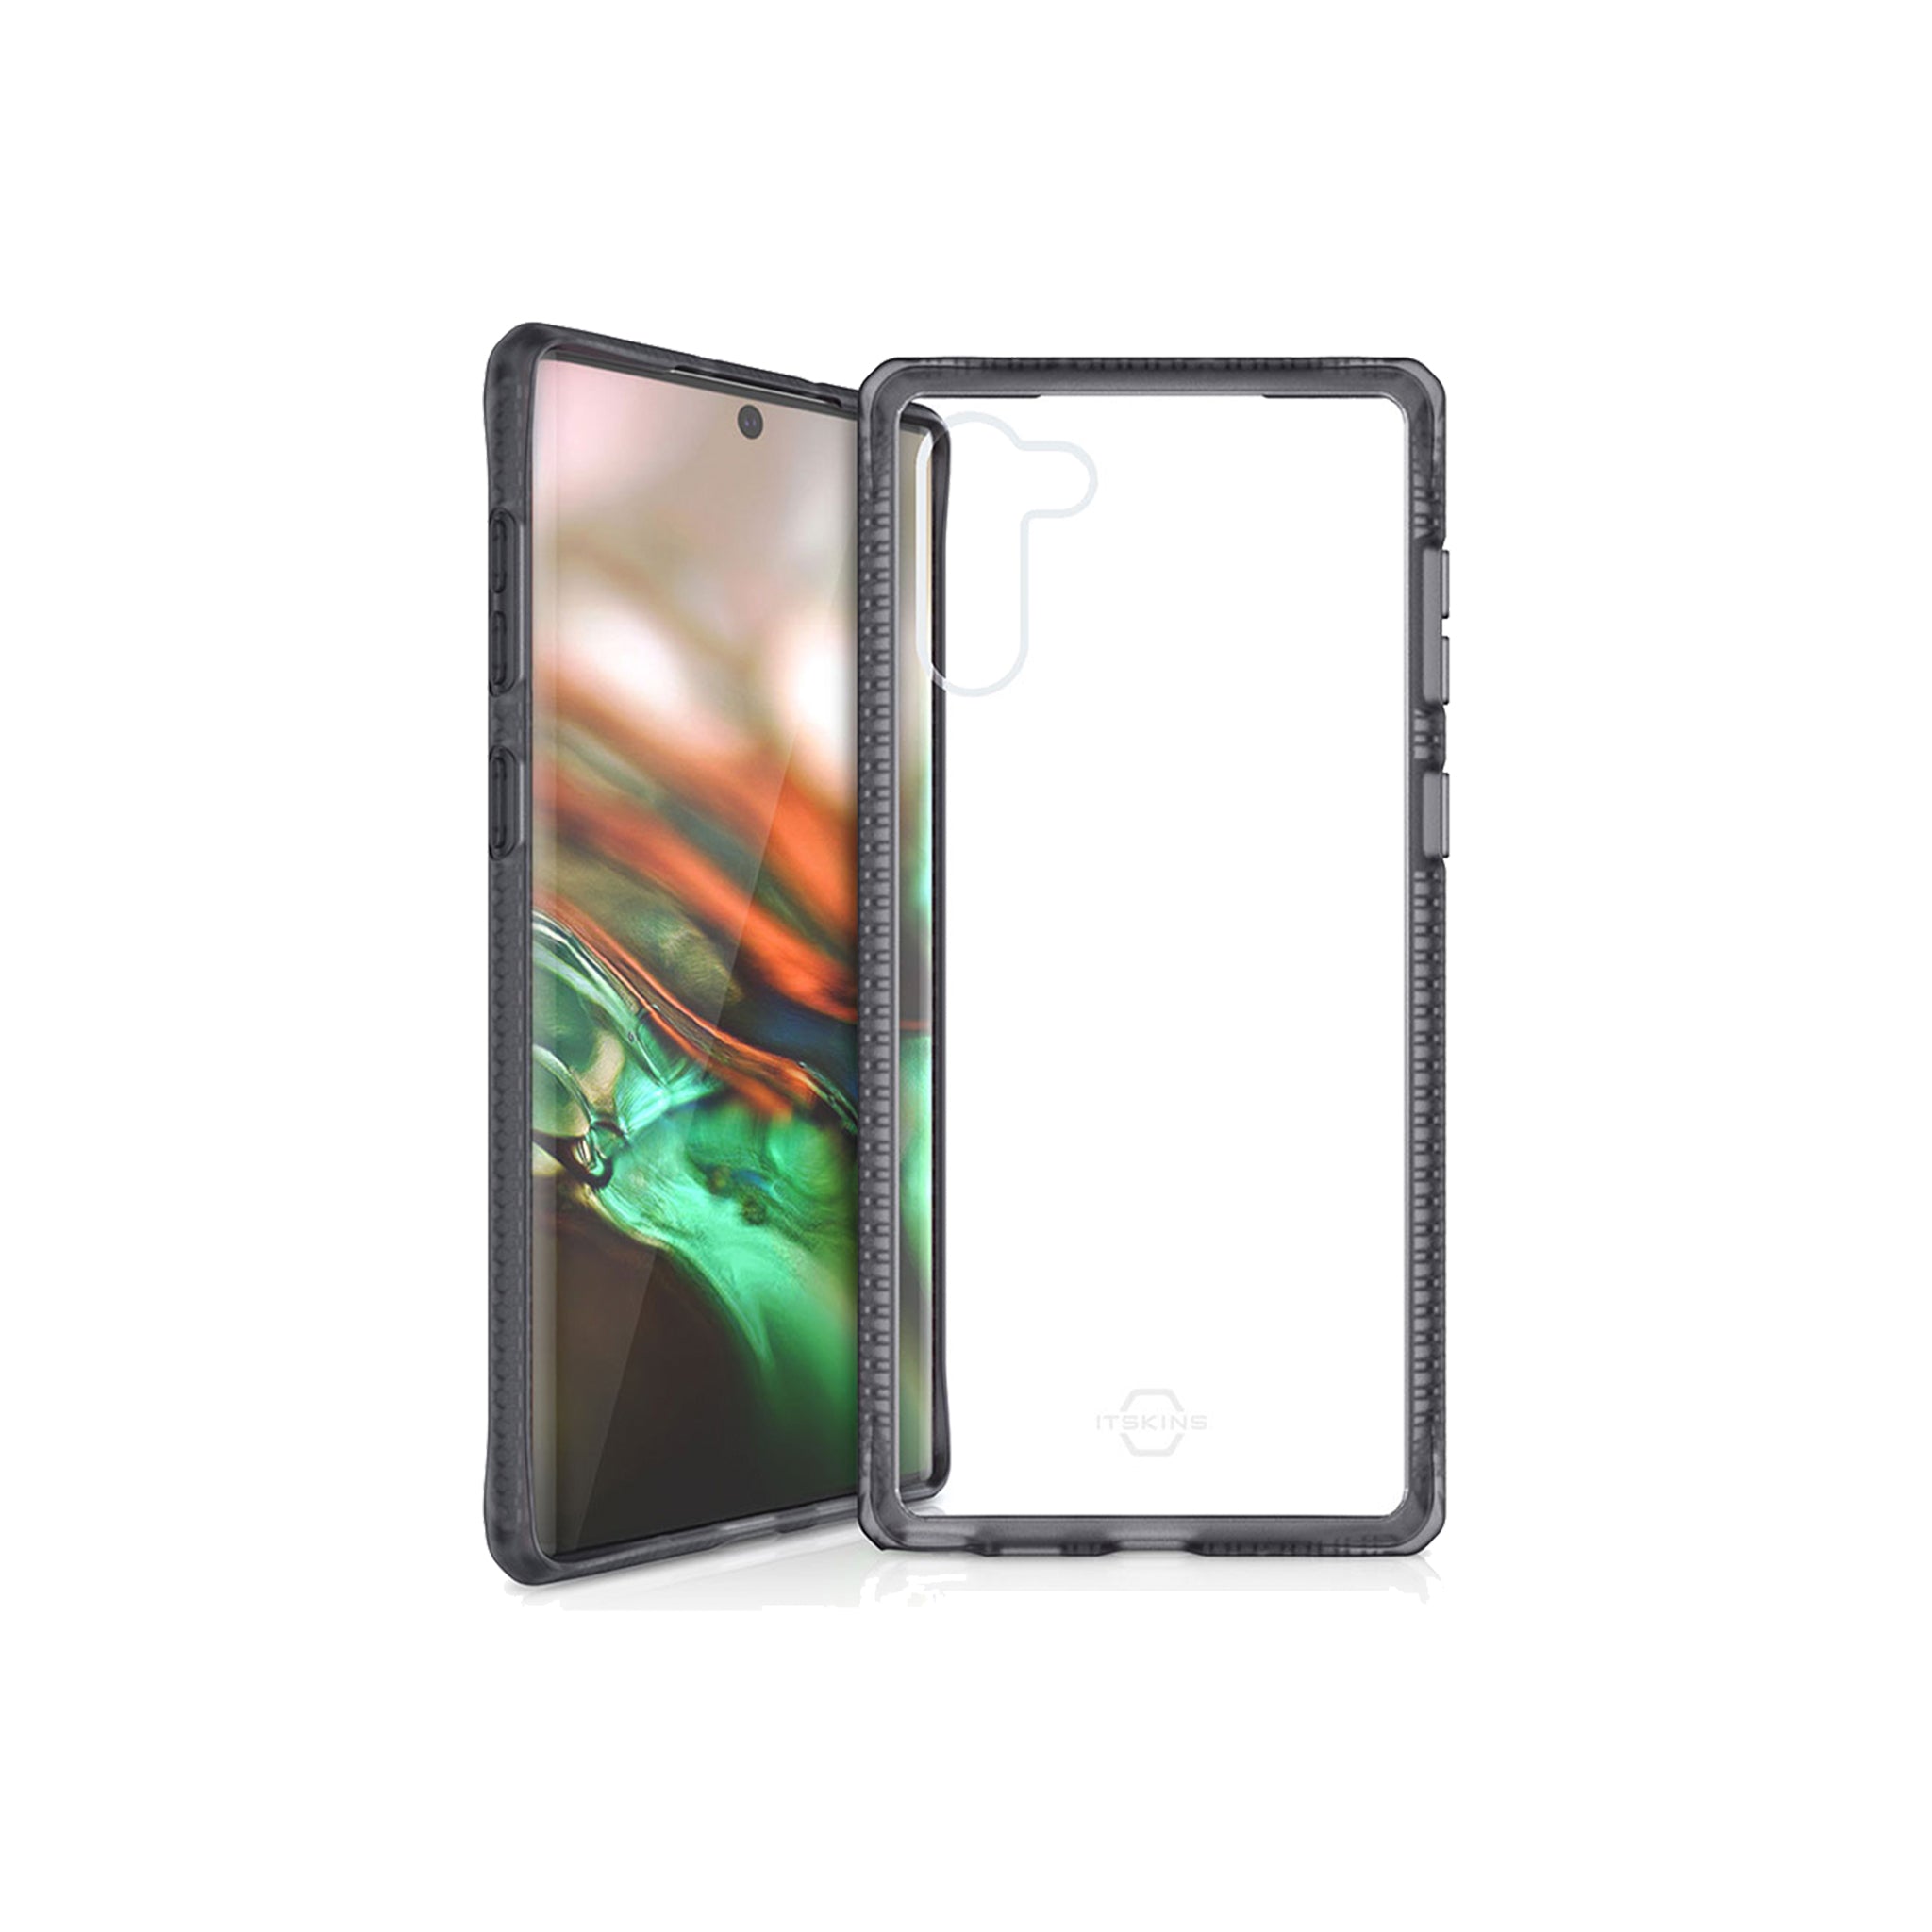 Itskins - Hybrid Frost Mkii Case For Samsung Galaxy Note 10 - Black And Transparent